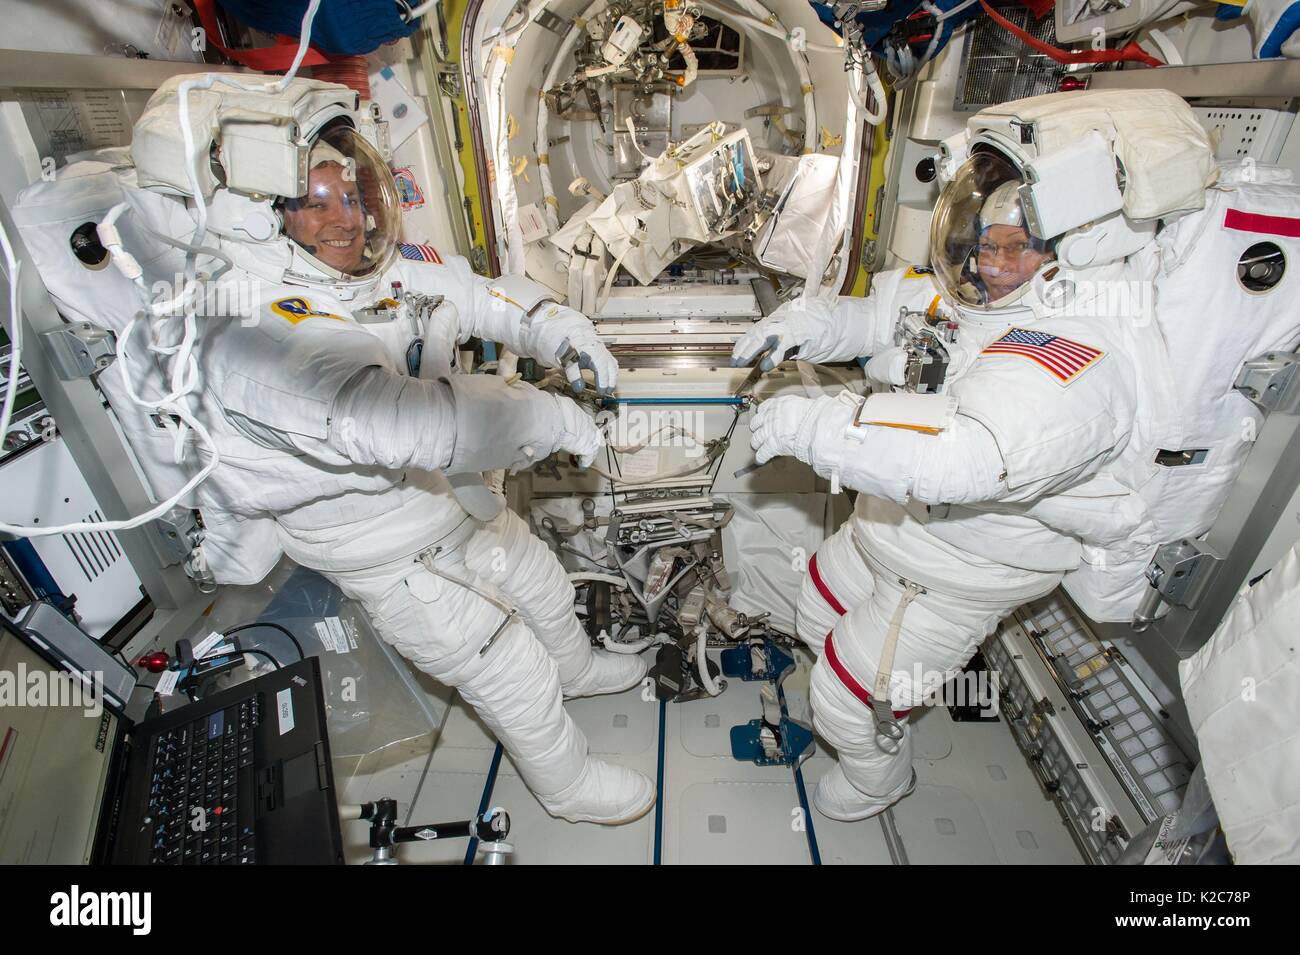 NASA International Space Station Expedition 51 prime crew members American astronauts Jack Fischer (left) and Peggy Whitson wear spacesuits in the Quest airlock in preparation for their EVA spacewalk May 12, 2017 in Earth orbit. Stock Photo